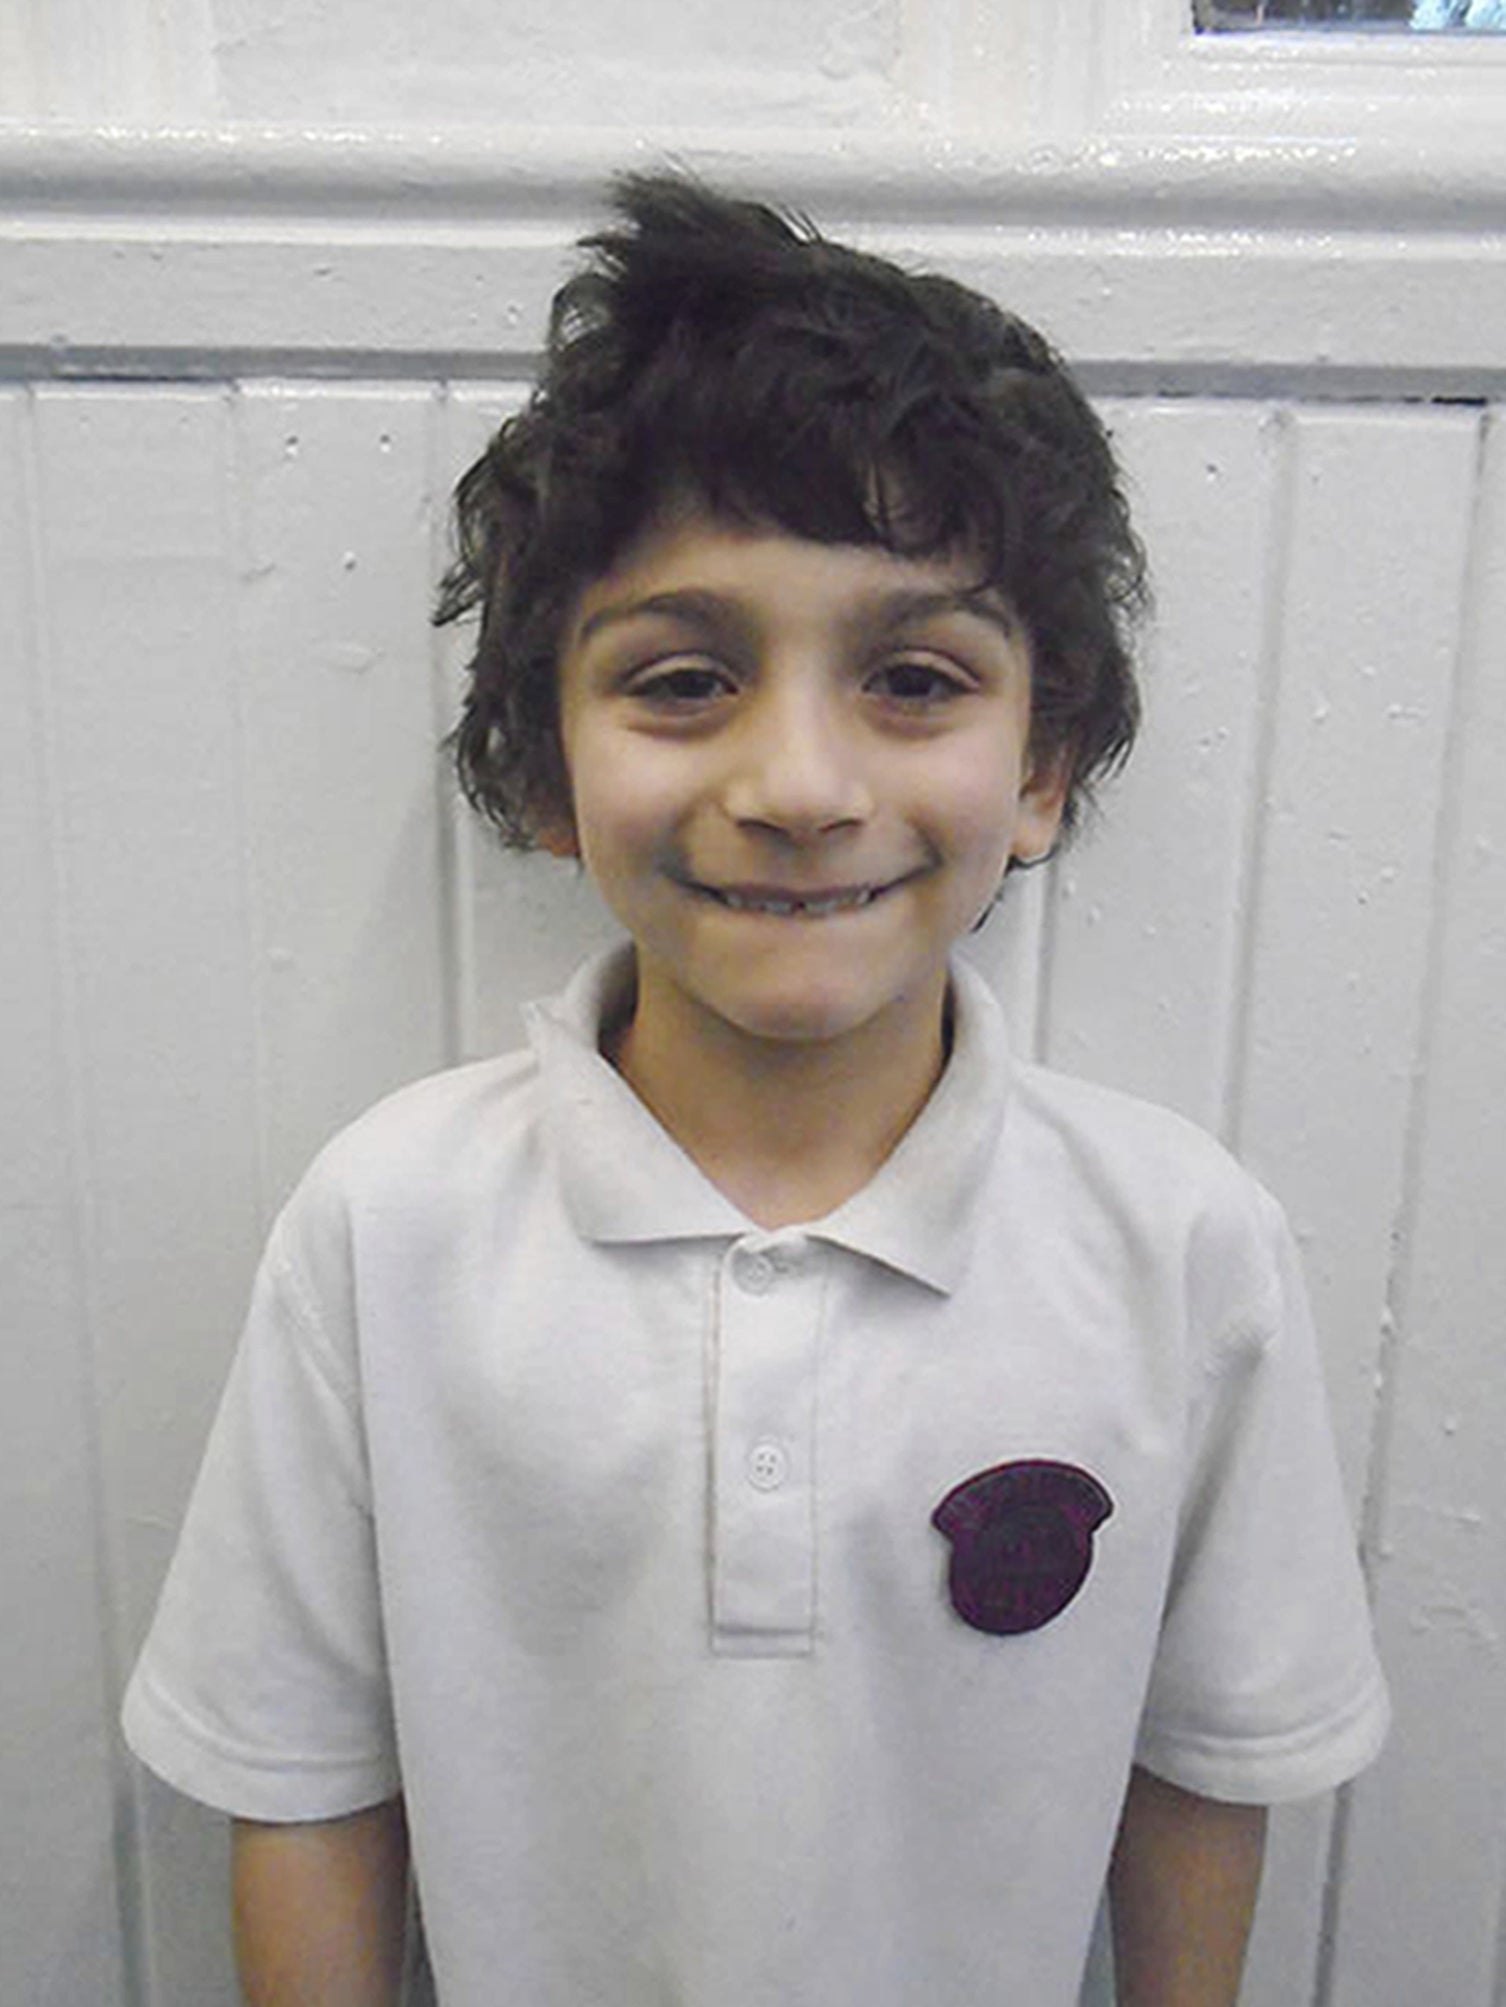 Child protection services failed 7-year-old Hakeem Hussain who died after being neglected by his drug-addict mother